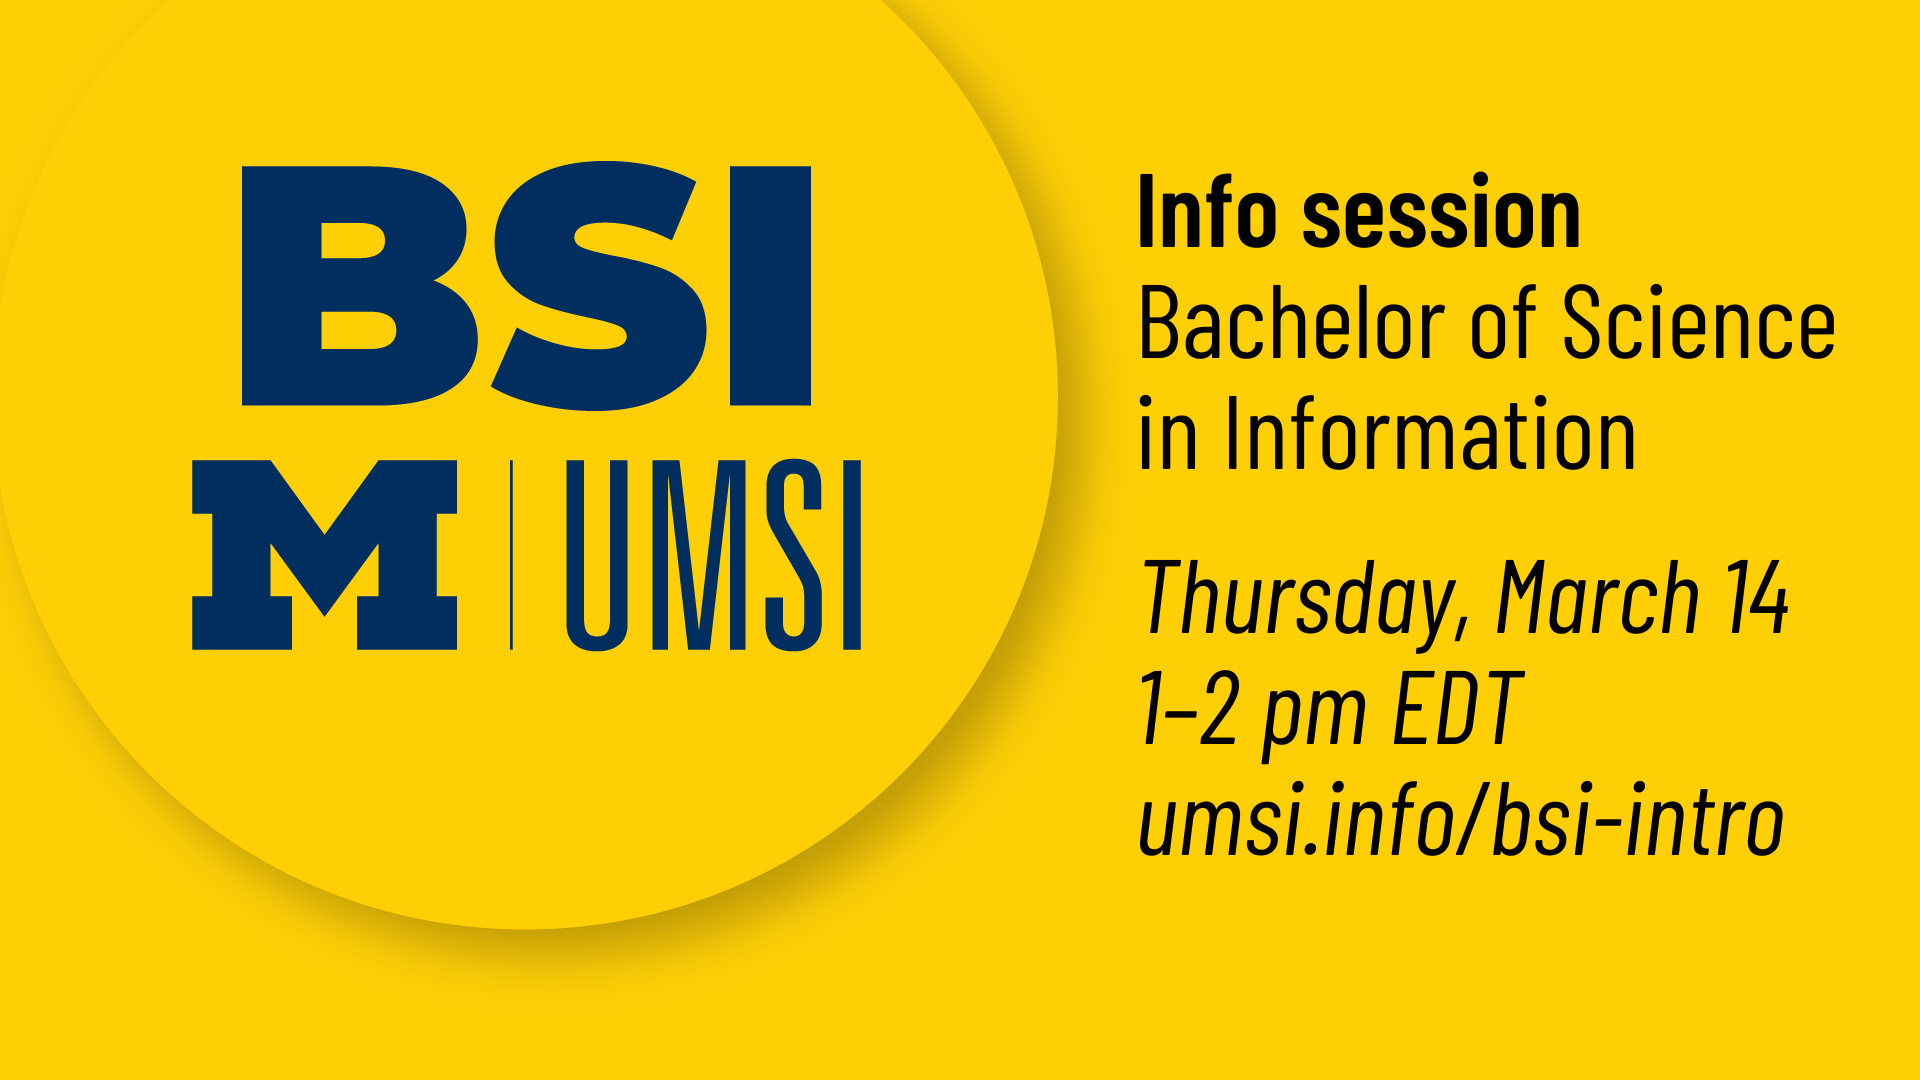 “UMSI BSI info session. Bachelor of Science in Information. Thursday, March 14. 1-2 pm EDT. umsi.info/bsi-intro.